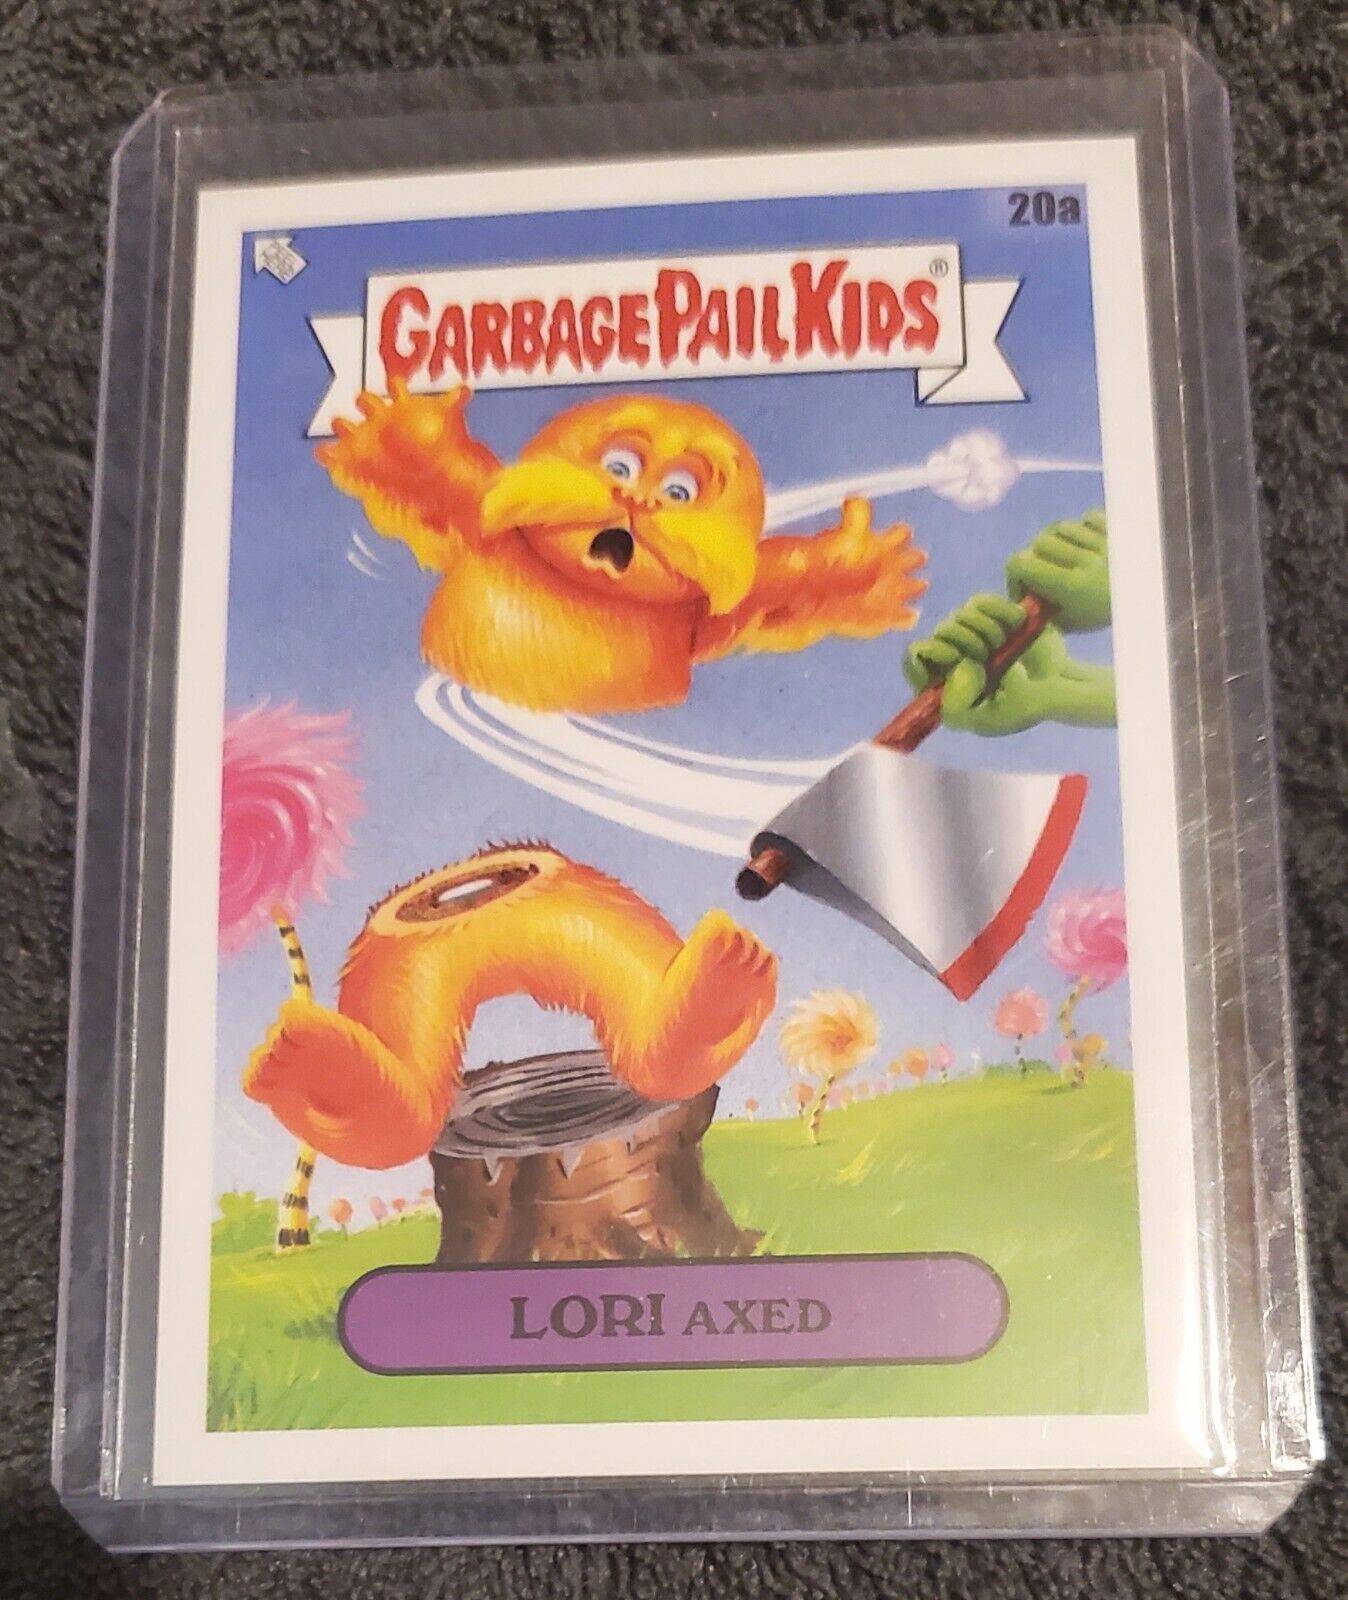 2022 Garbage Pail Kids Bookworms Lori Axed Card Gross Adaptations 20a